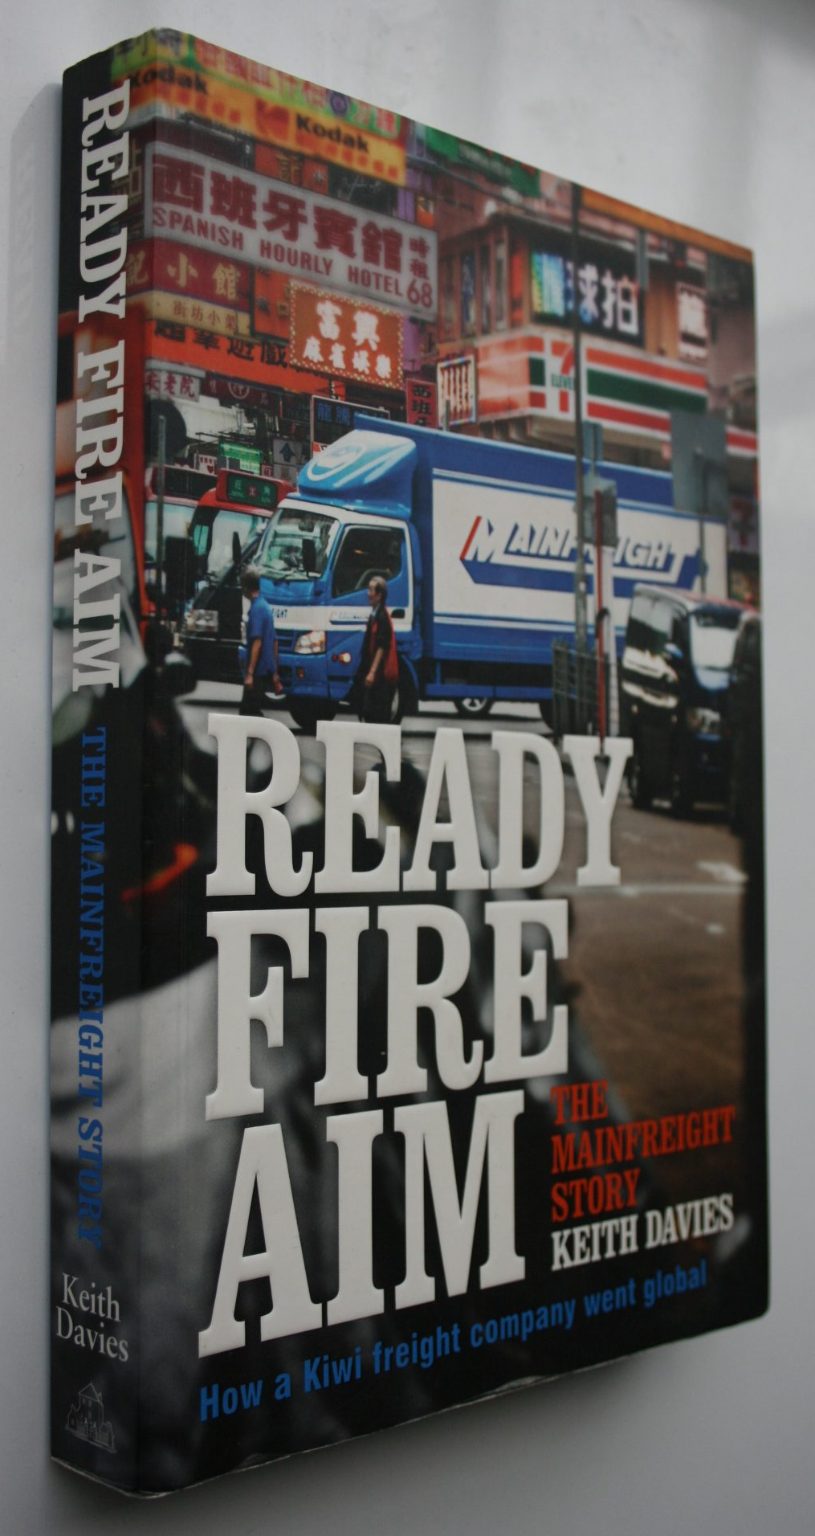 Ready Fire Aim The Mainfreight Story By Keith Davies. SIGNED BY DON BRAID.